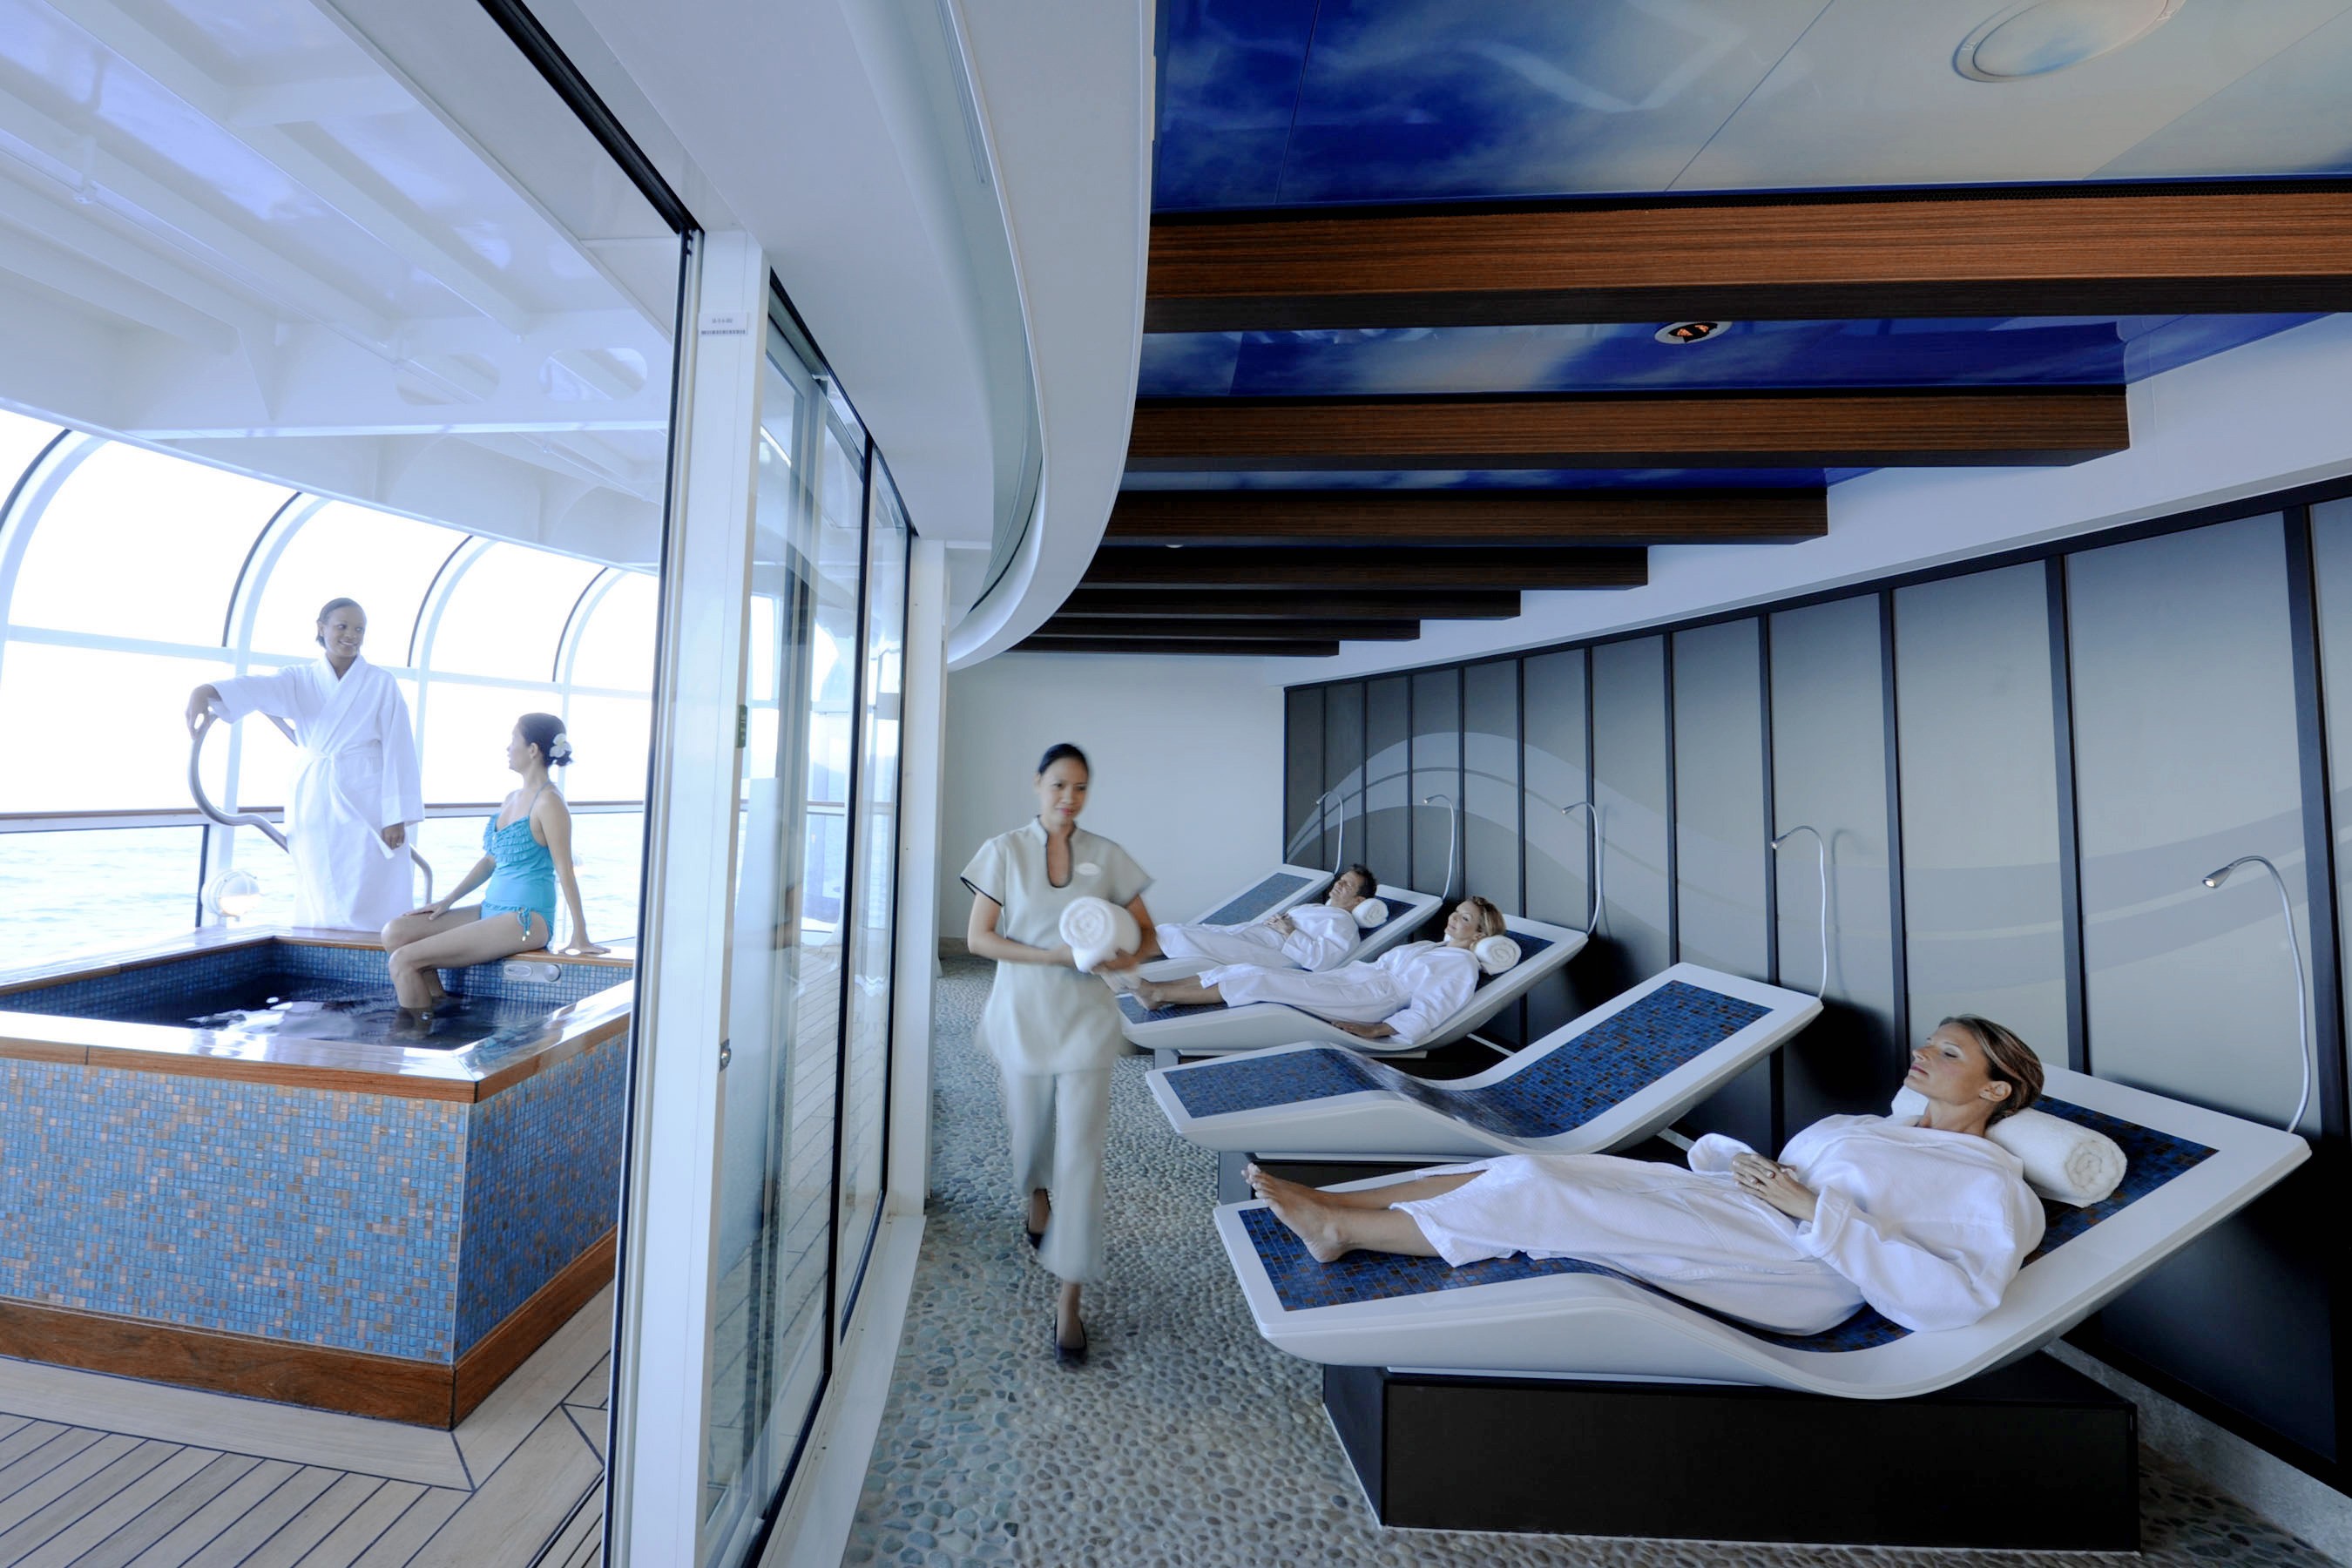 Senses Spa & Salon, an environment that provides relaxation and tranquility to adult guests aboard the Disney Dream, features the Rainforest Room. This serene space offers the benefits of steam, heat and hydrotherapy to help guests completely unwind and i (Foto: Diana Zalucky, photographer)